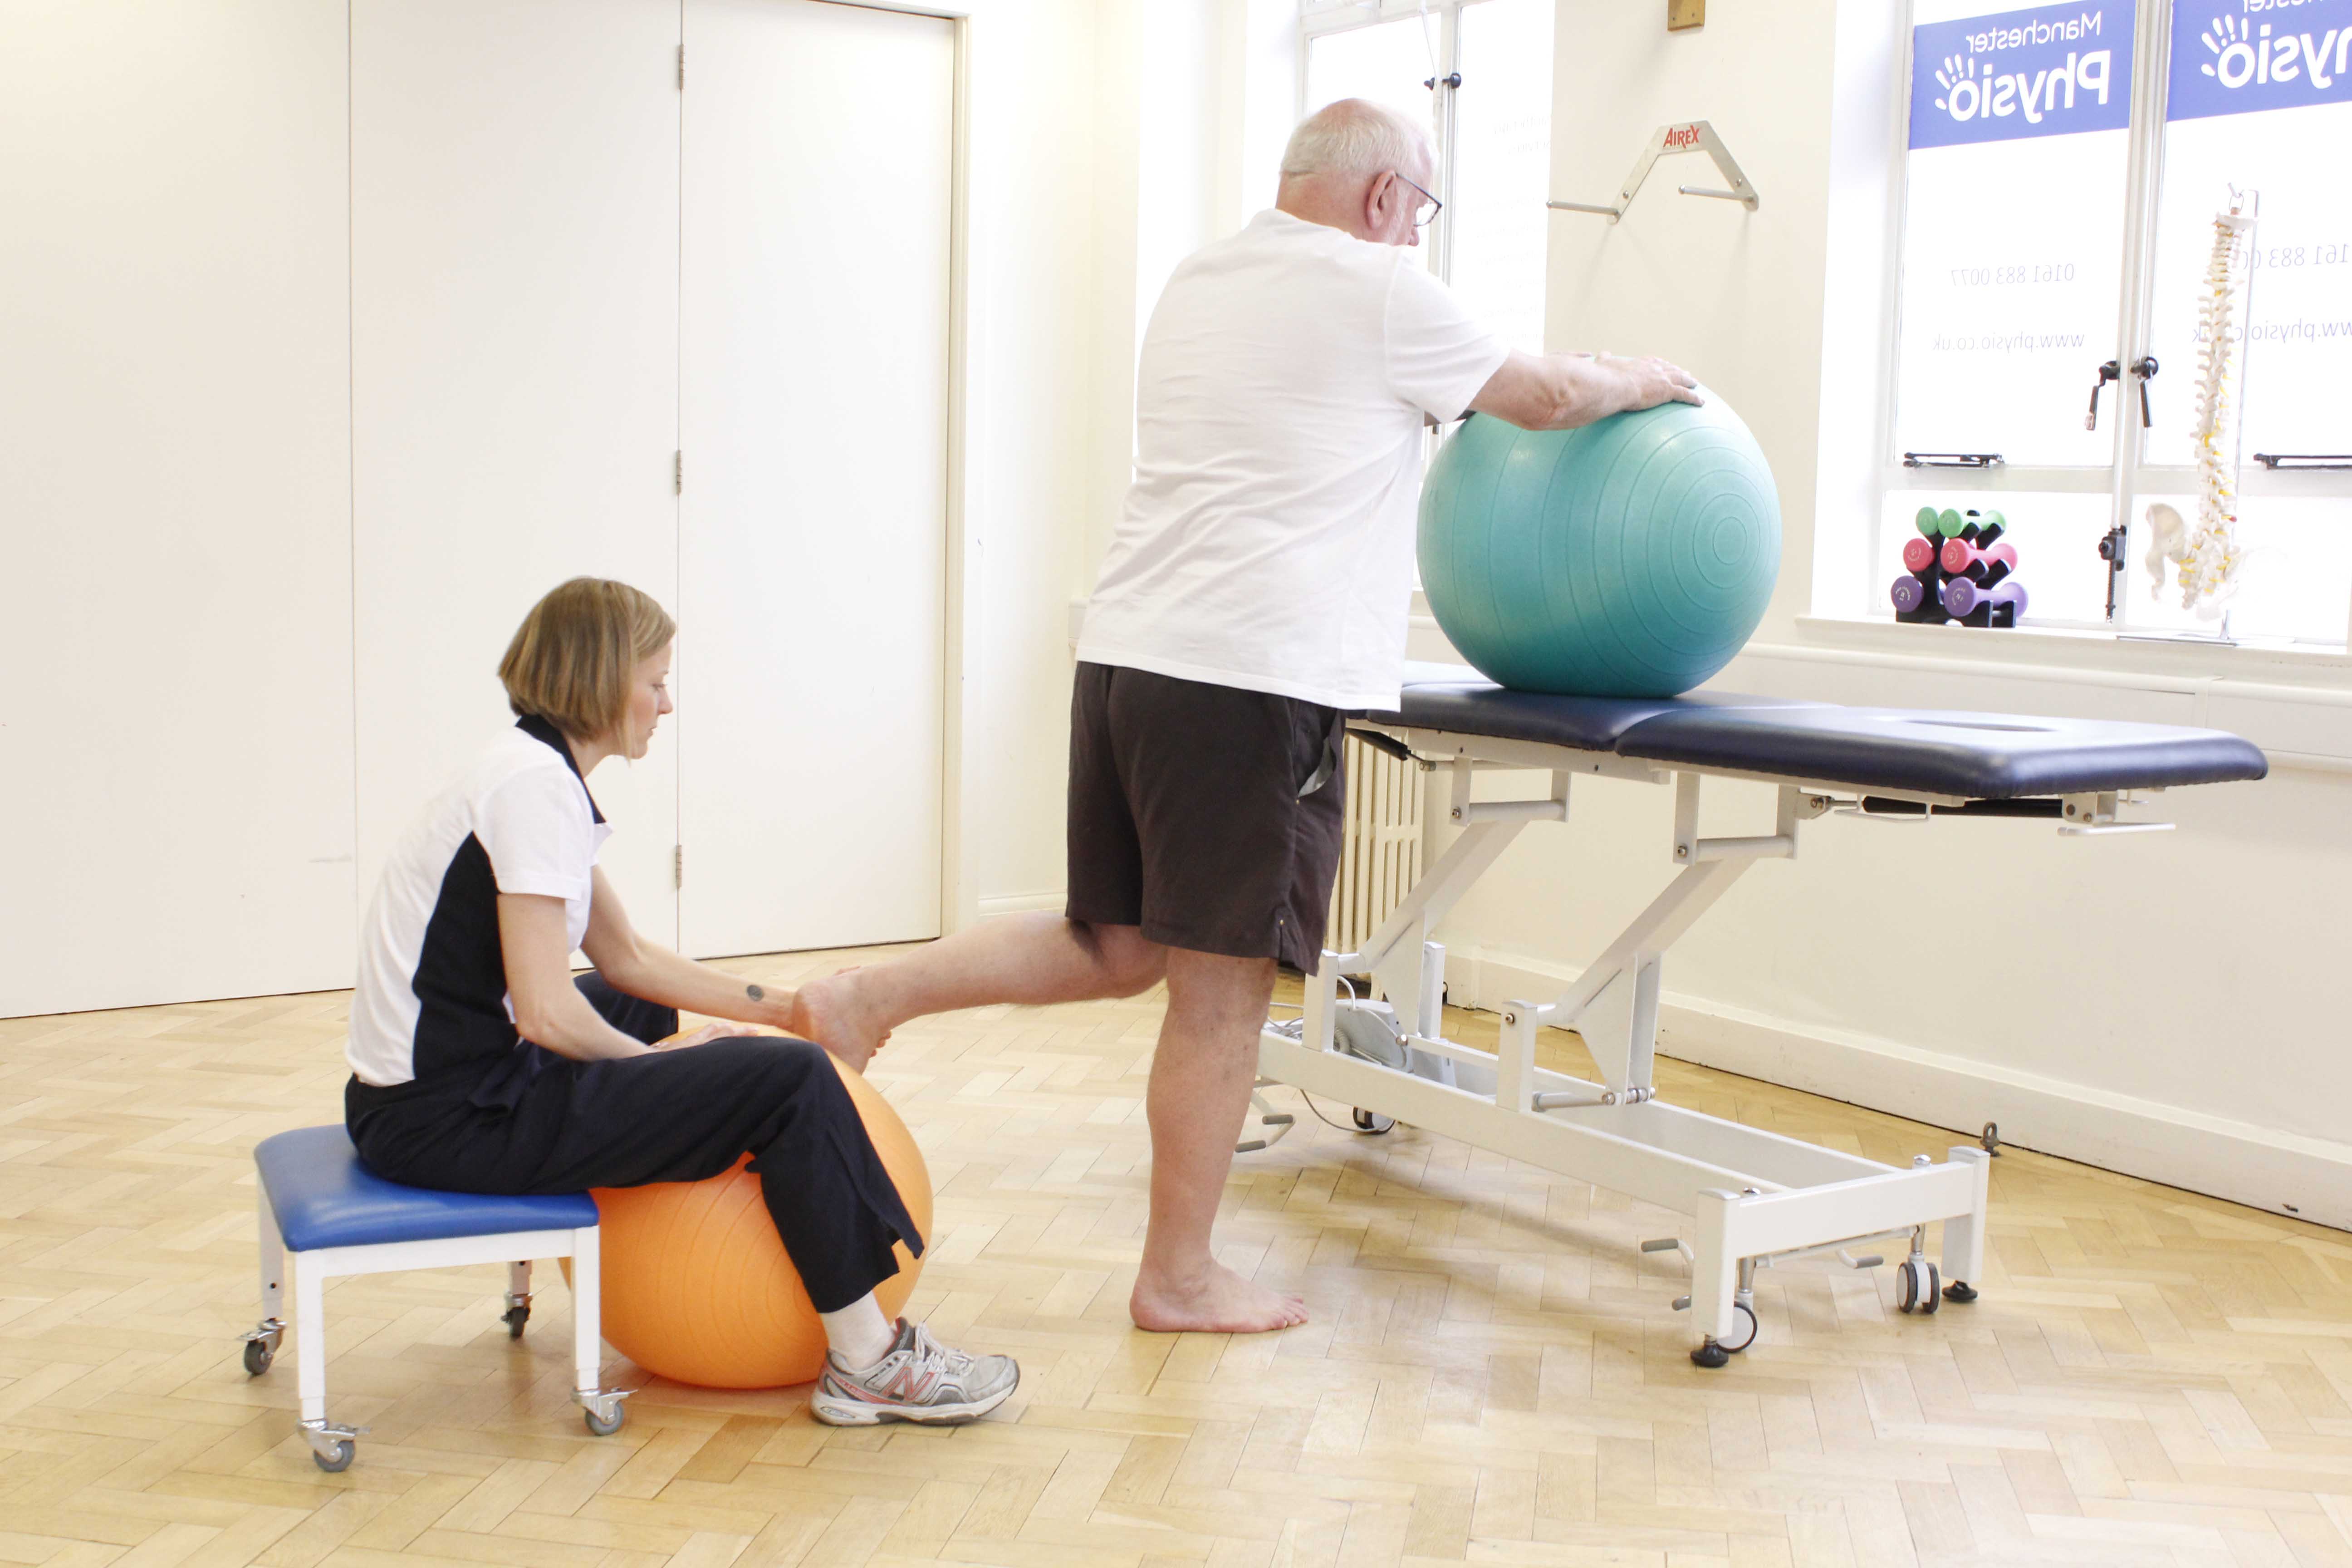 Stability training for the foot and ankle supervised by an experienced physiotherapist